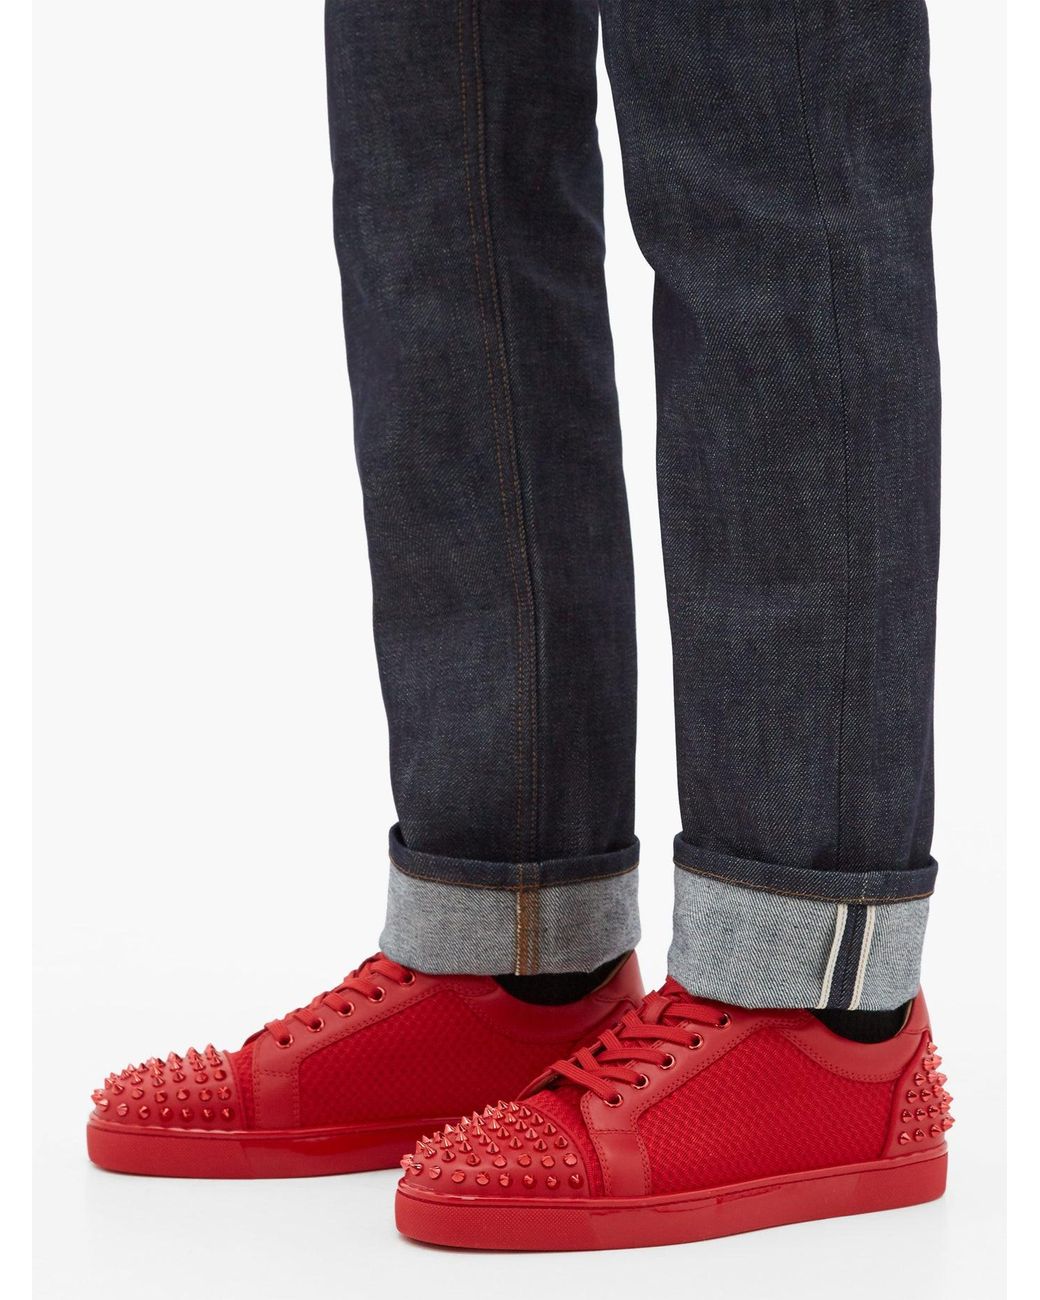 Christian Louboutin Seavaste 2 Spiked Leather Low-top Trainers in 